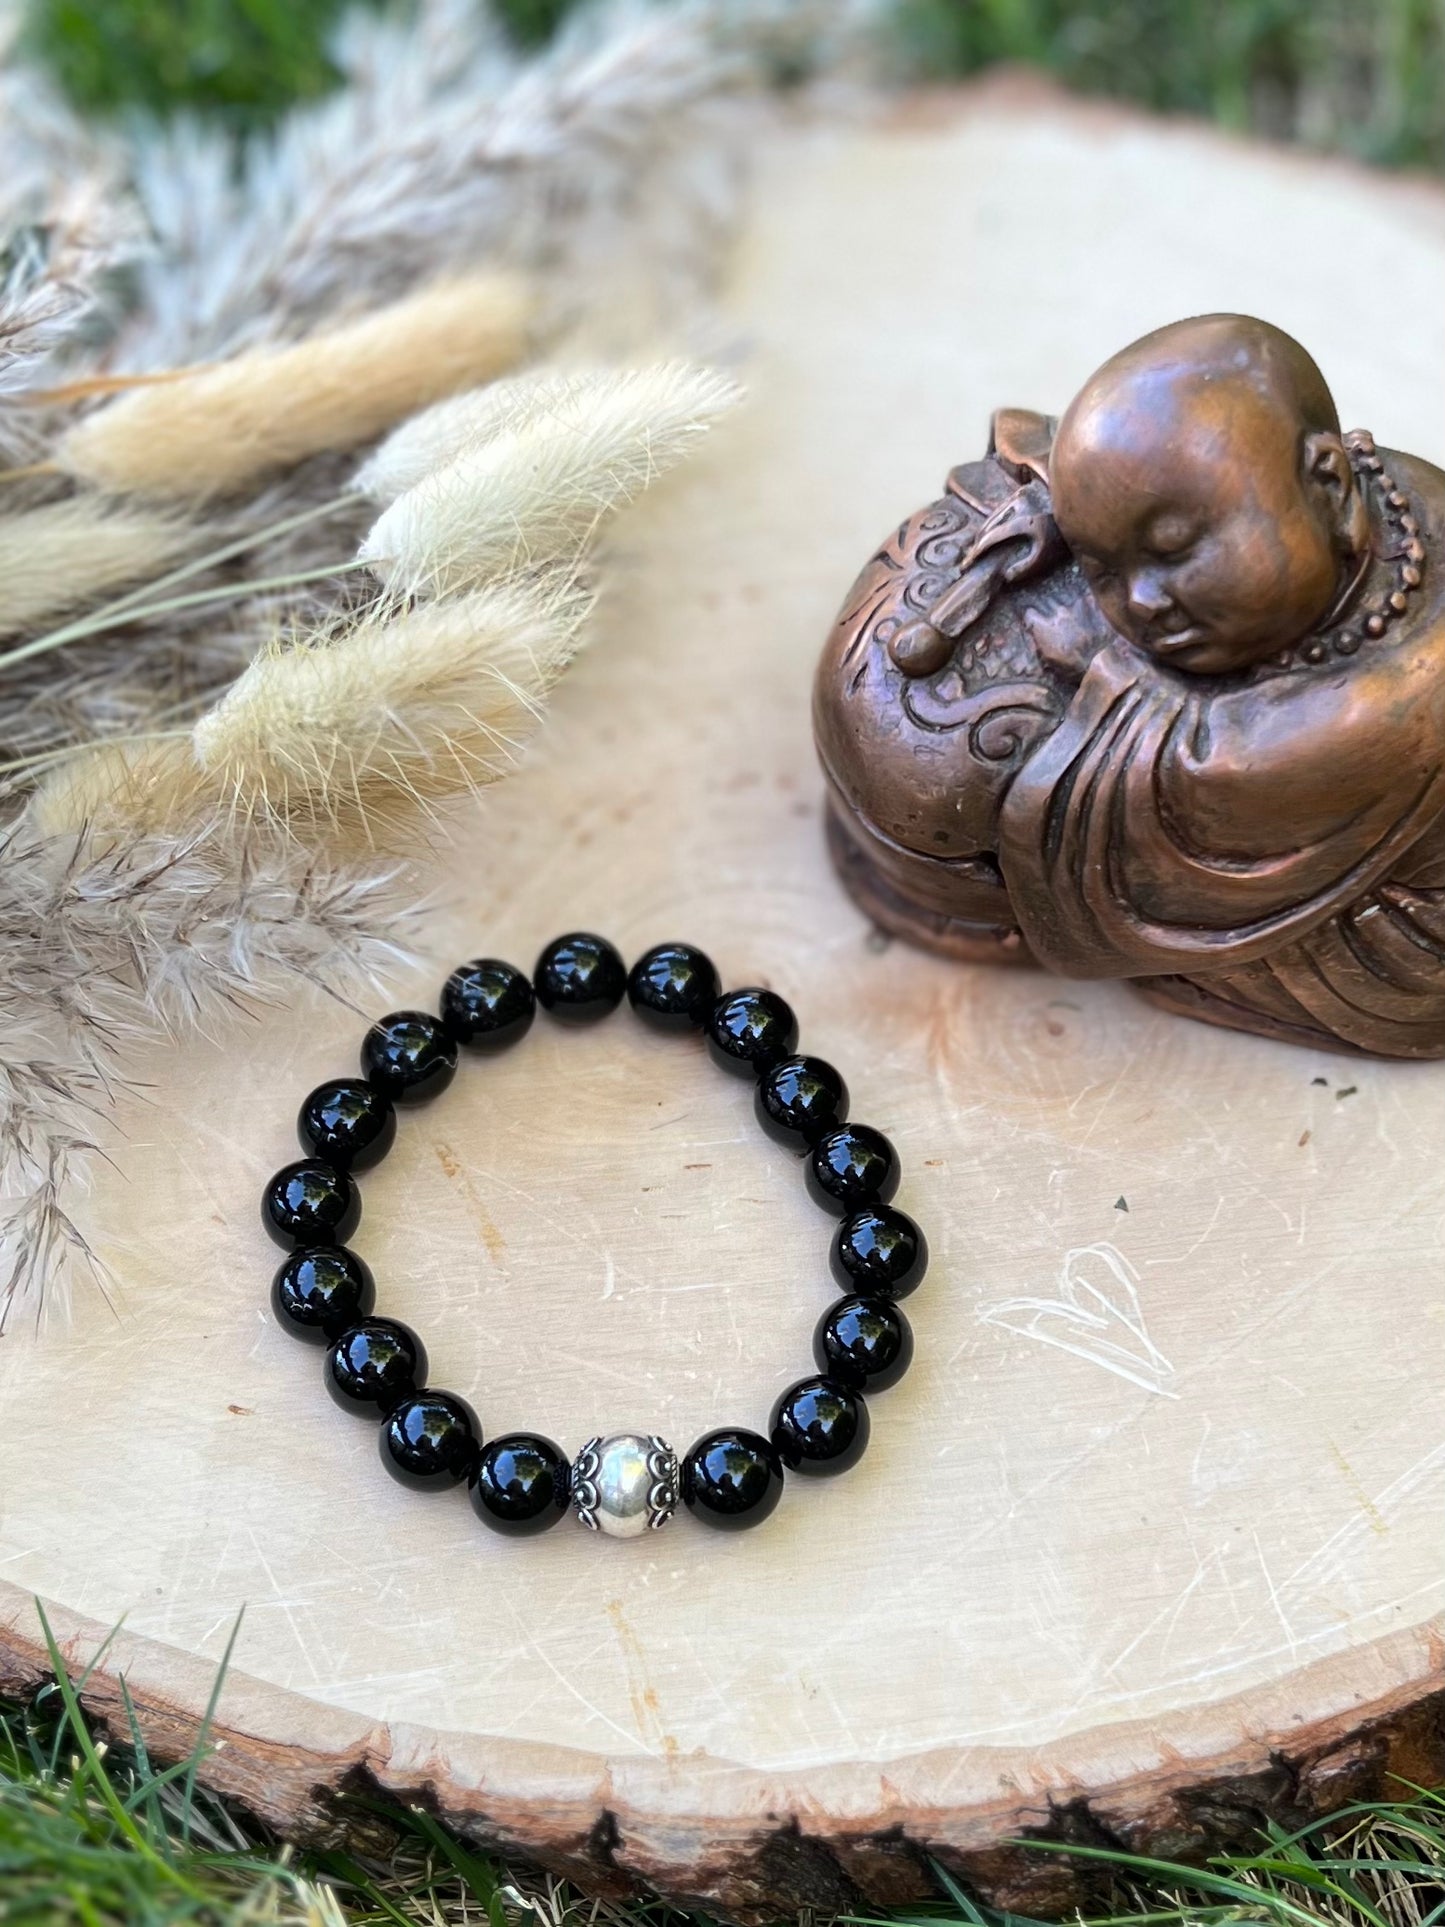 Black Obsidian Bracelet with a Sterling Silver Accent bead